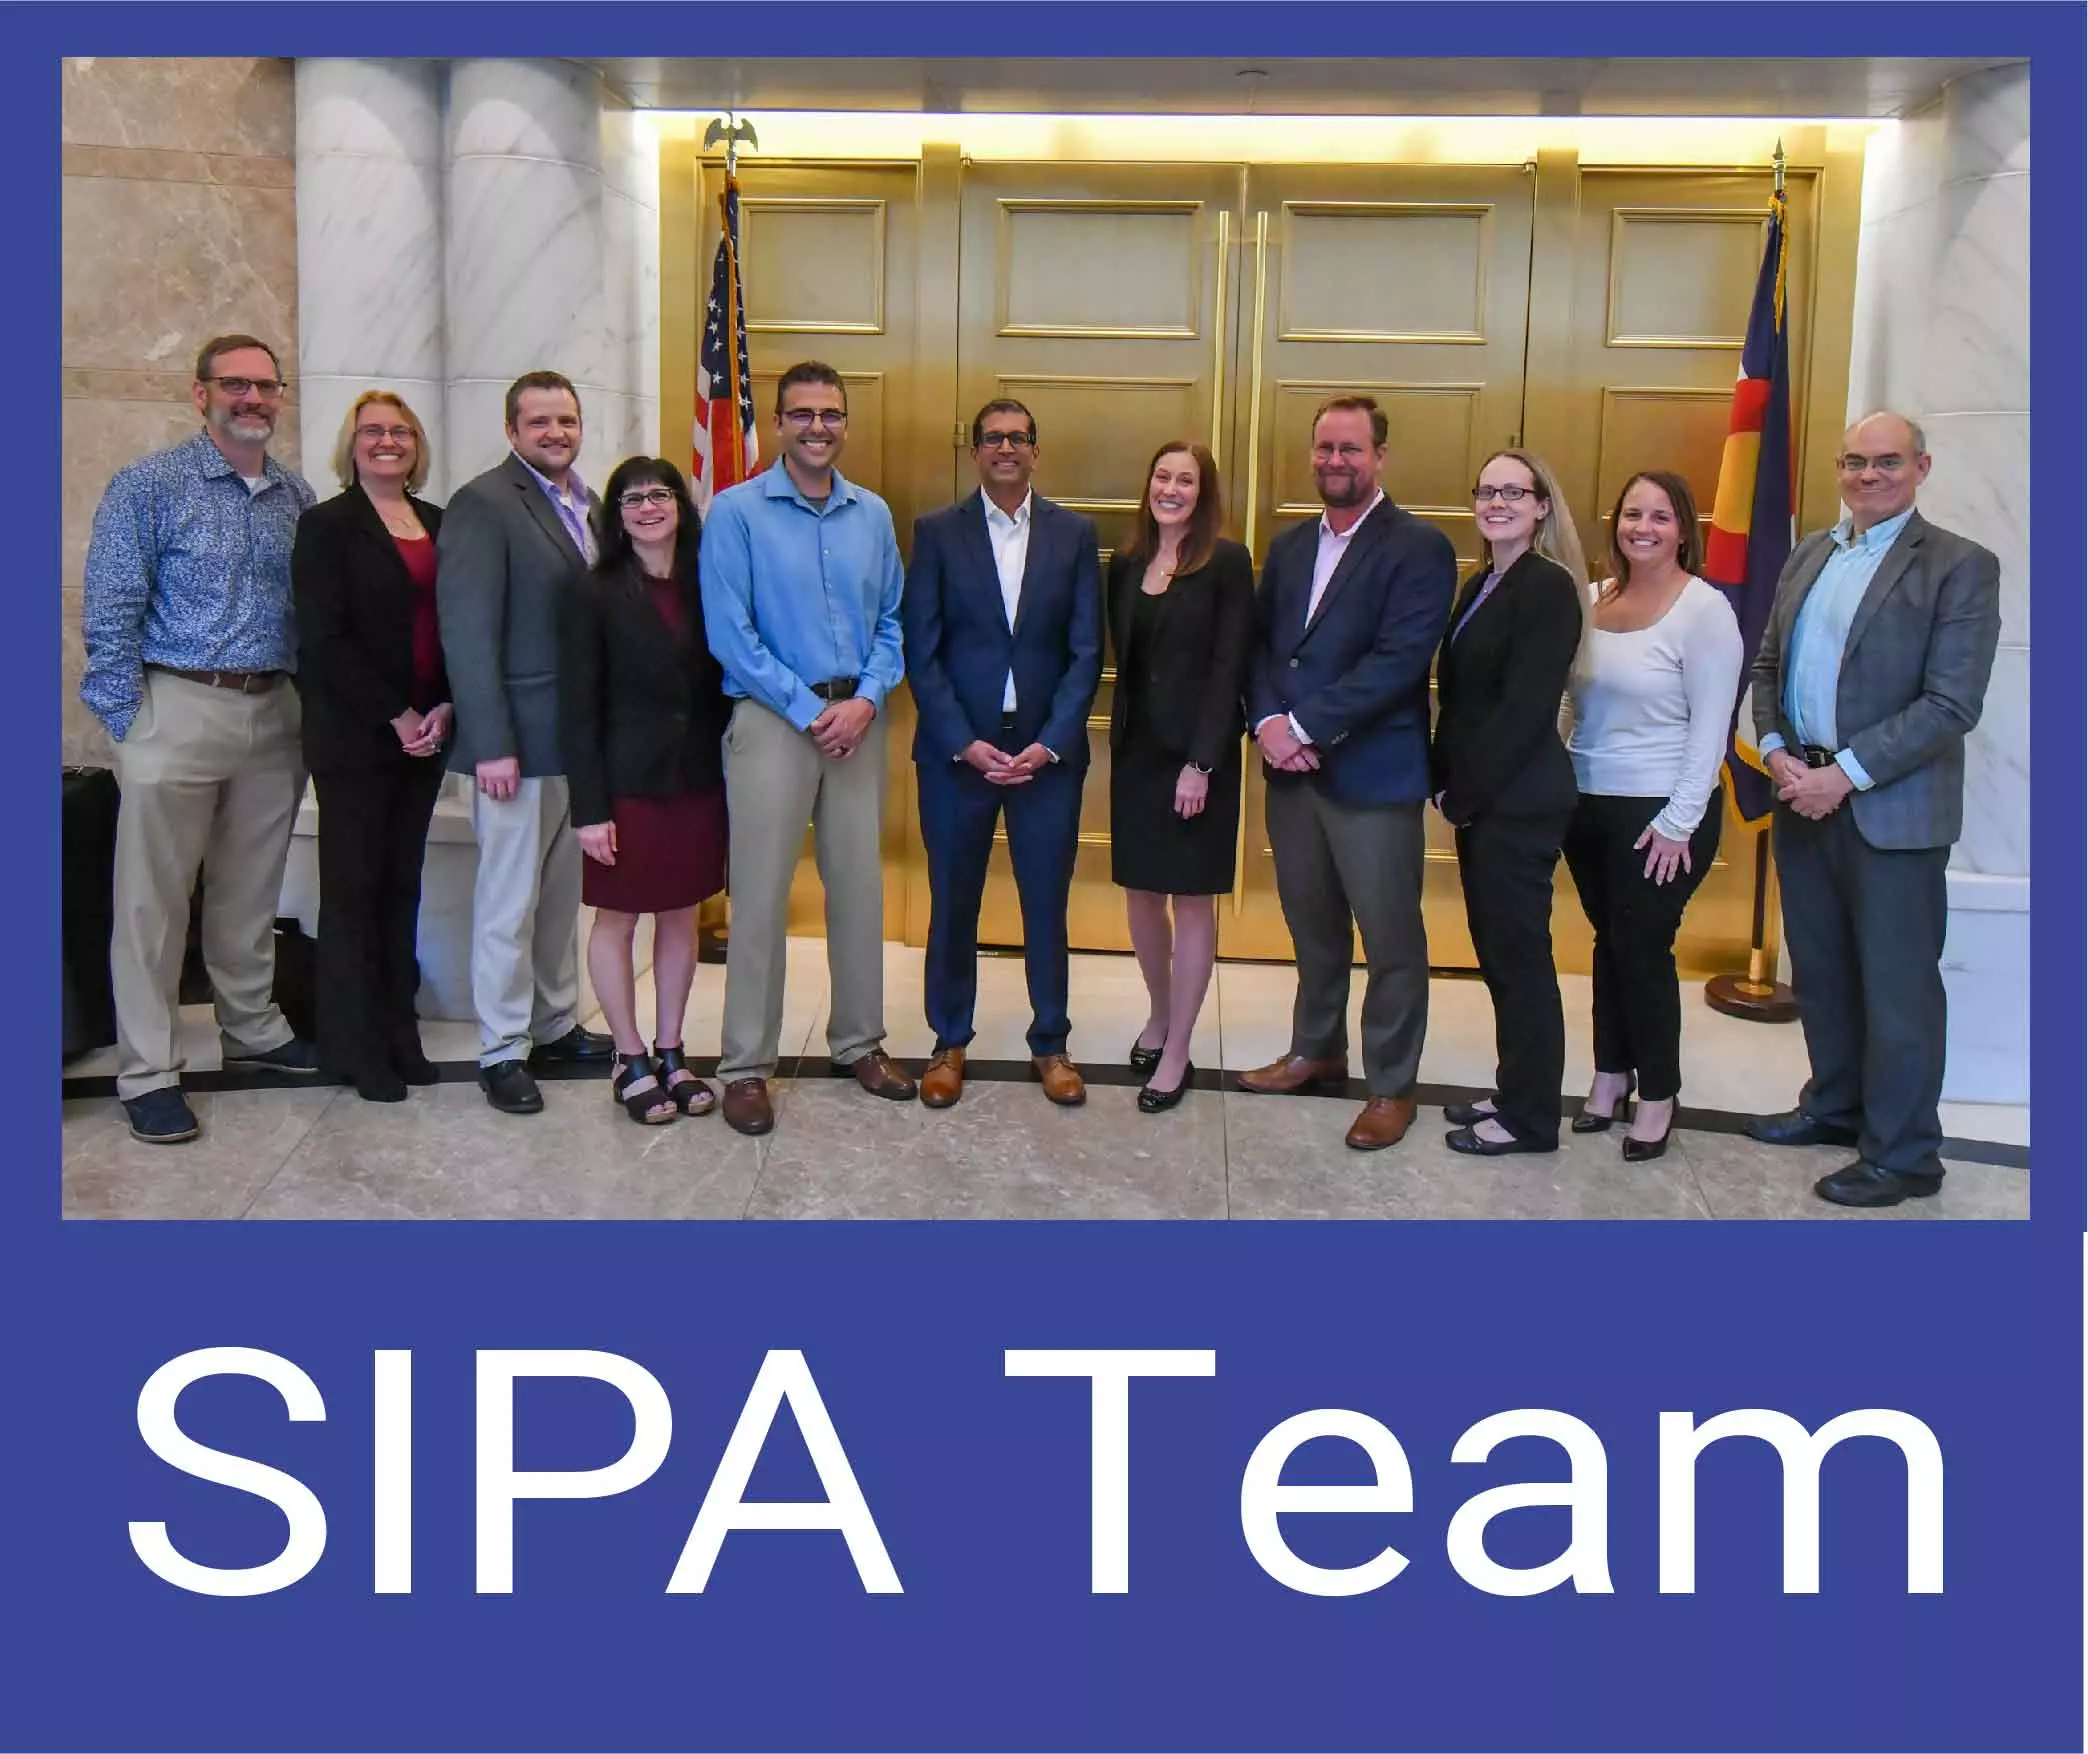 SIPA Team photo from the 2022 User Conference